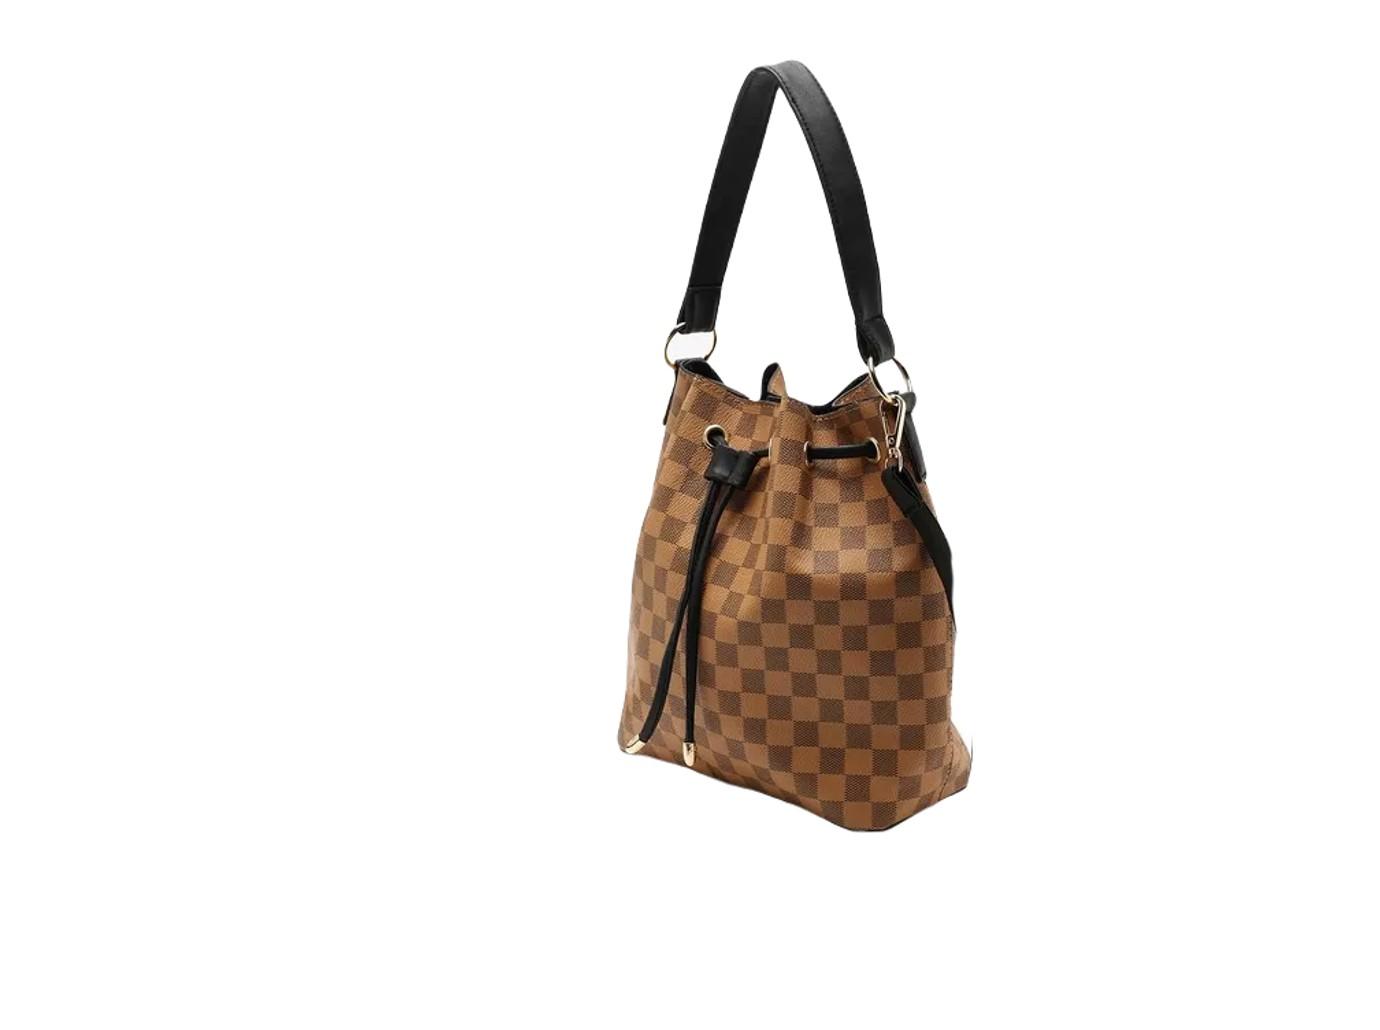 Boohoo brings out Louis Vuitton dupe bag - £1.4k cheaper than the designer  version - Chronicle Live